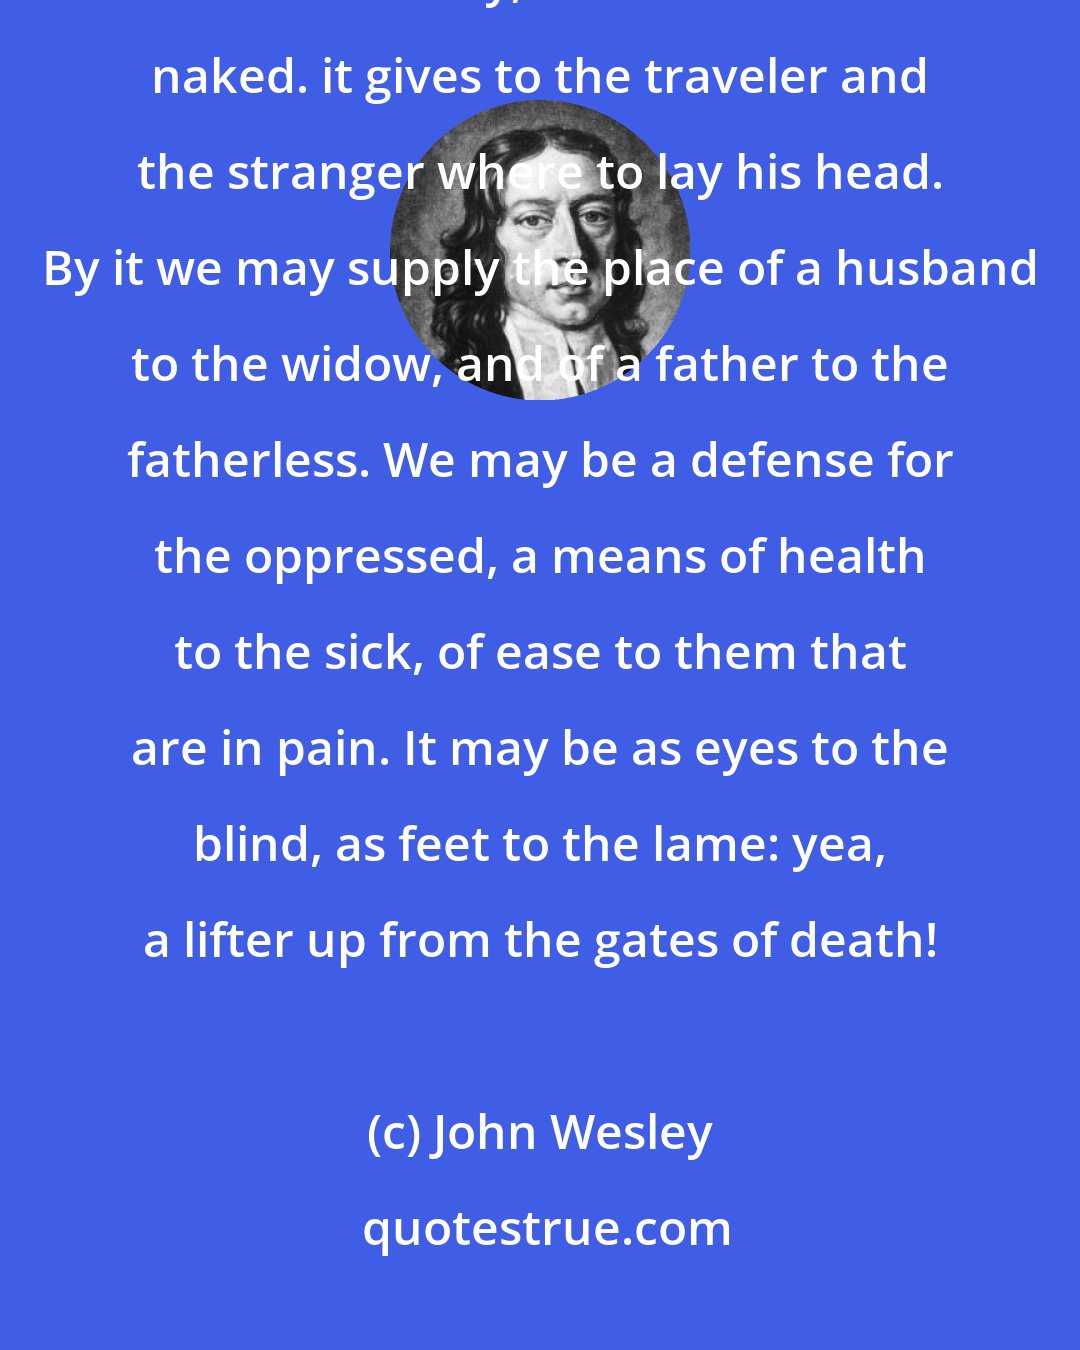 John Wesley: In the hands of [God's] children, it is food for the hungry, drink for the thirsty, raiment for the naked. it gives to the traveler and the stranger where to lay his head. By it we may supply the place of a husband to the widow, and of a father to the fatherless. We may be a defense for the oppressed, a means of health to the sick, of ease to them that are in pain. It may be as eyes to the blind, as feet to the lame: yea, a lifter up from the gates of death!